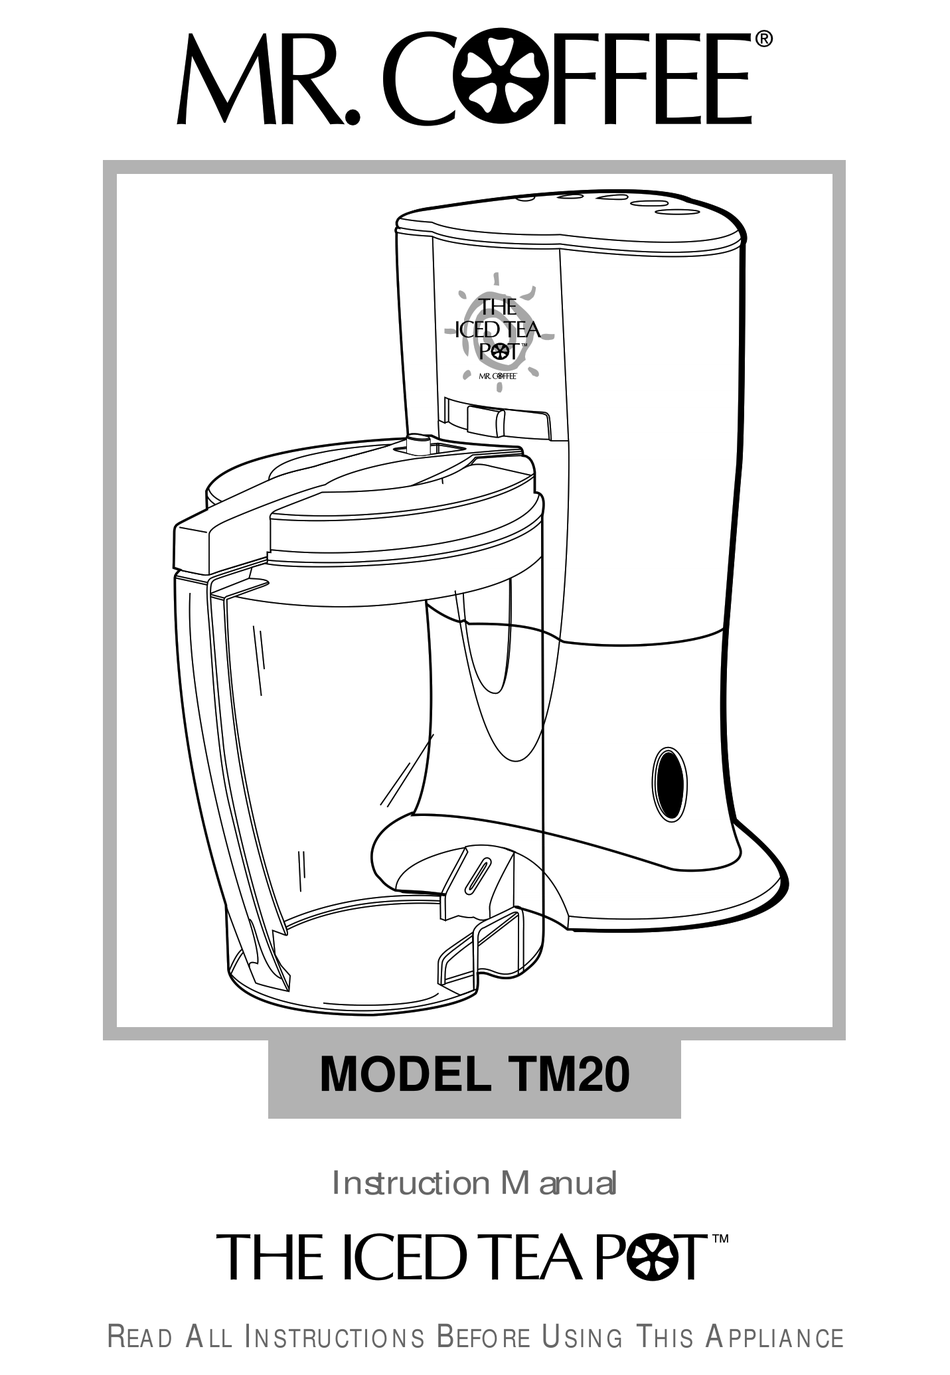 Mr. Coffee TM70 Iced Tea Maker with Pitcher